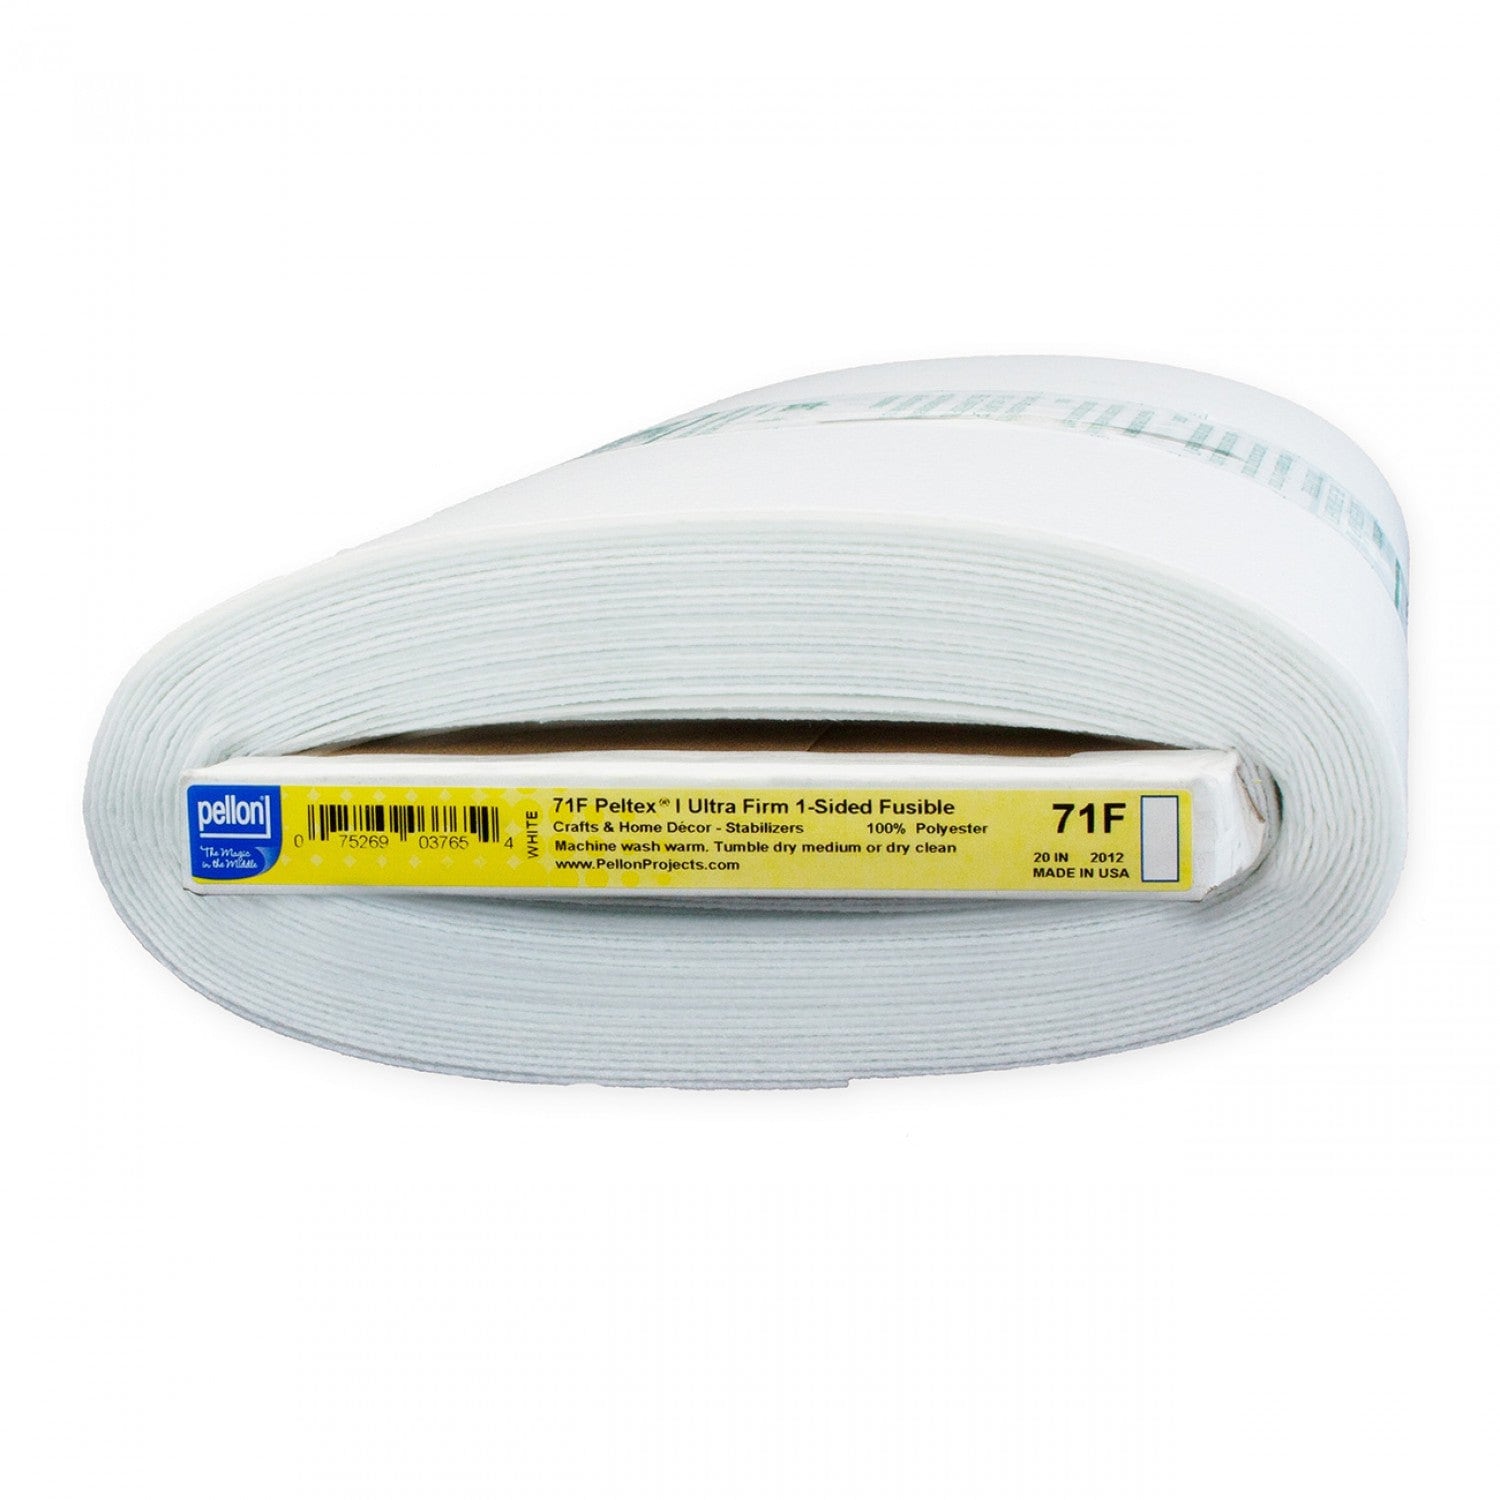 Pellon 15 Inches x 3 Yards White Fusible Interfacing (2-Pack)